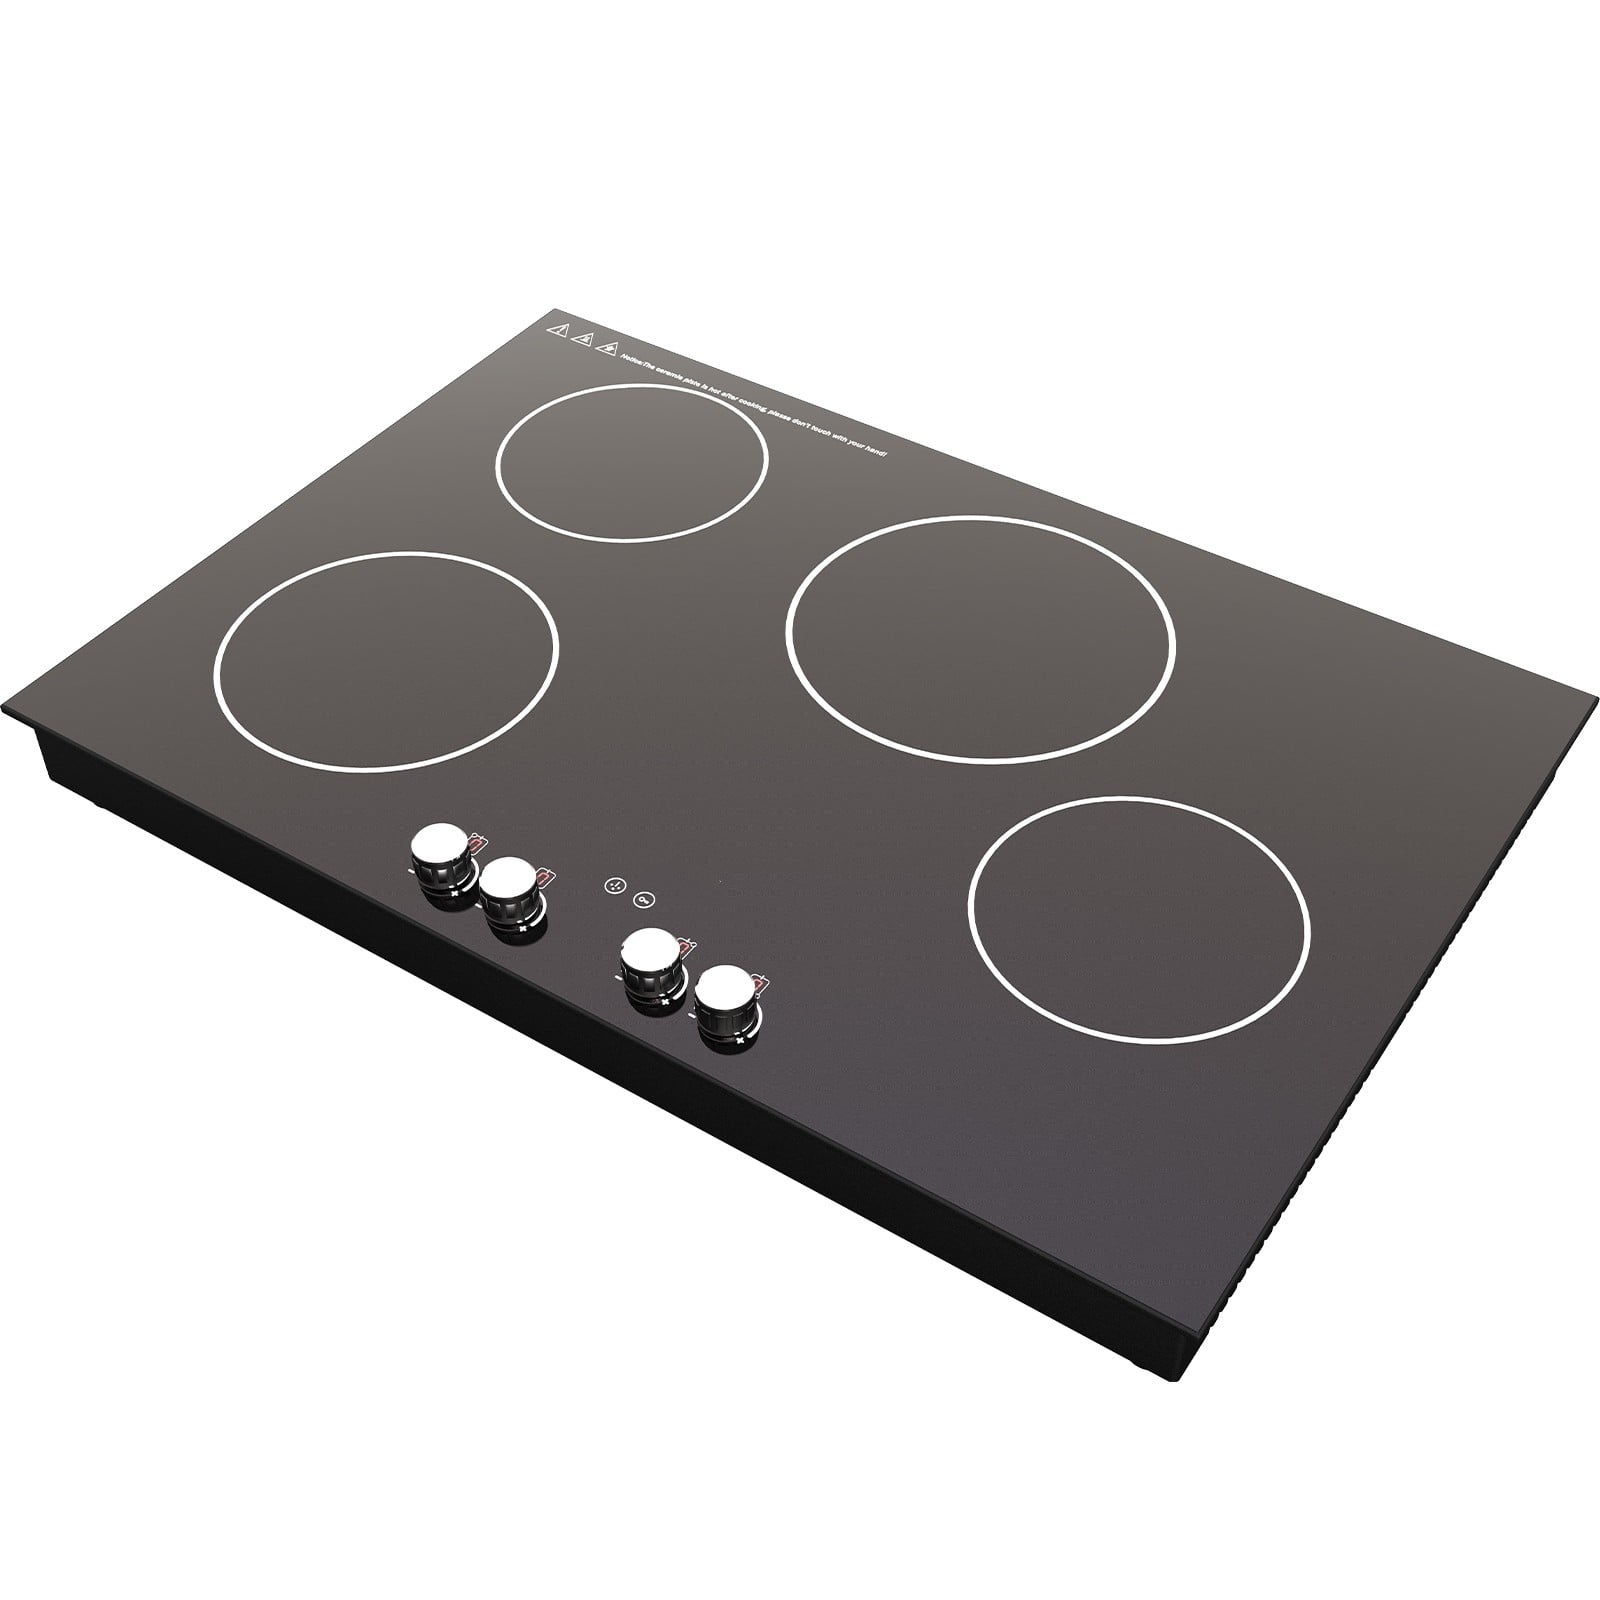 BENTISM Electric Induction Cooktop Built-in Stove Top 11in 2 Burners 120V 